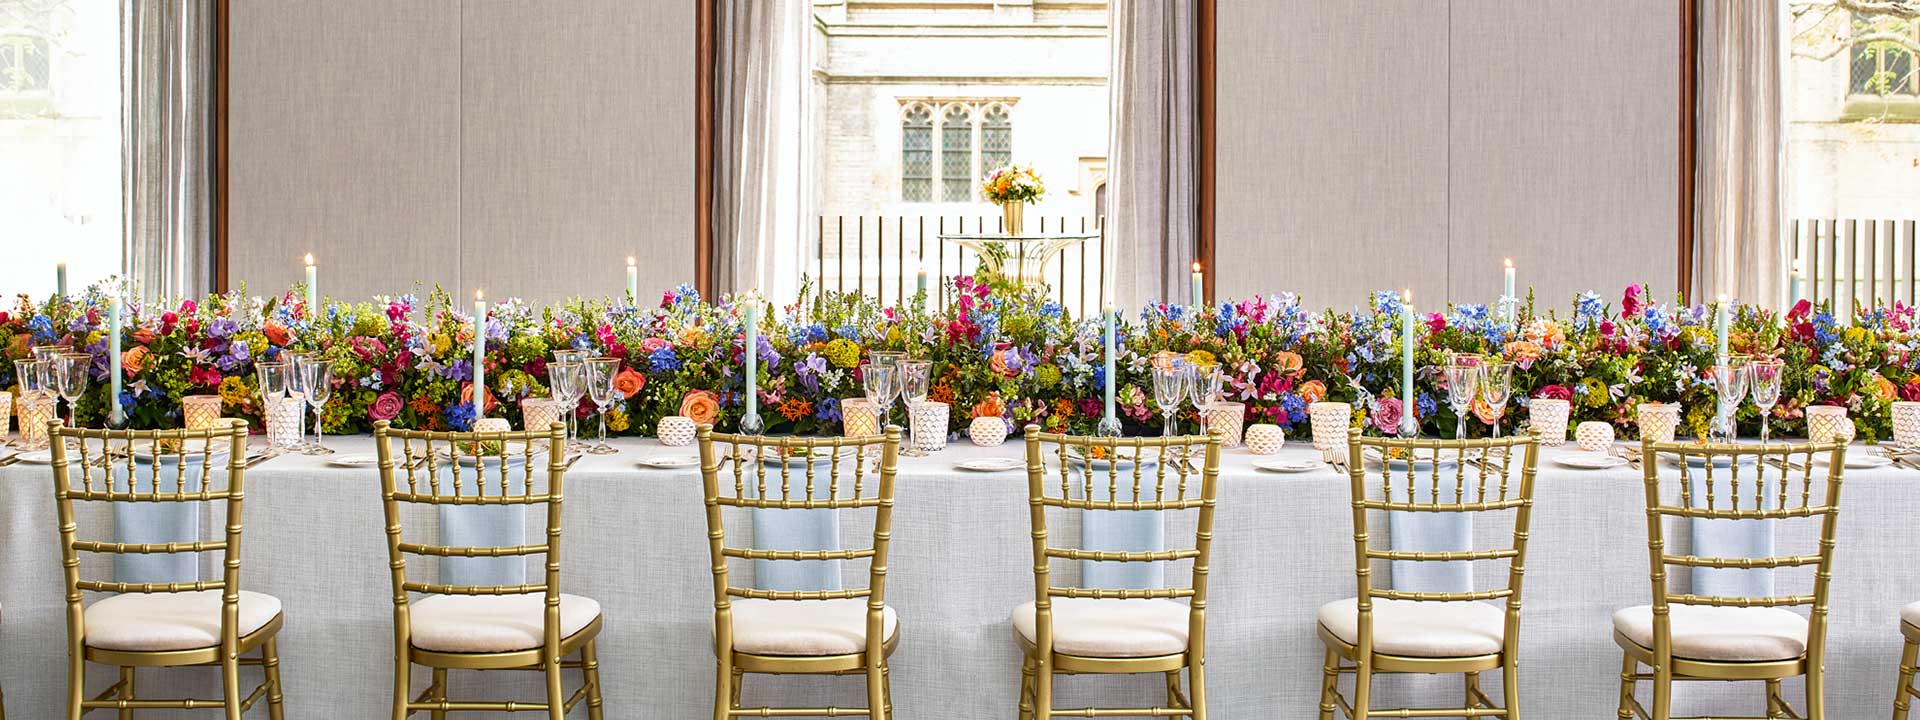 Colourful flower arrangements on the table and candle decoration create a romantic atmosphere in the Belgravia Room.